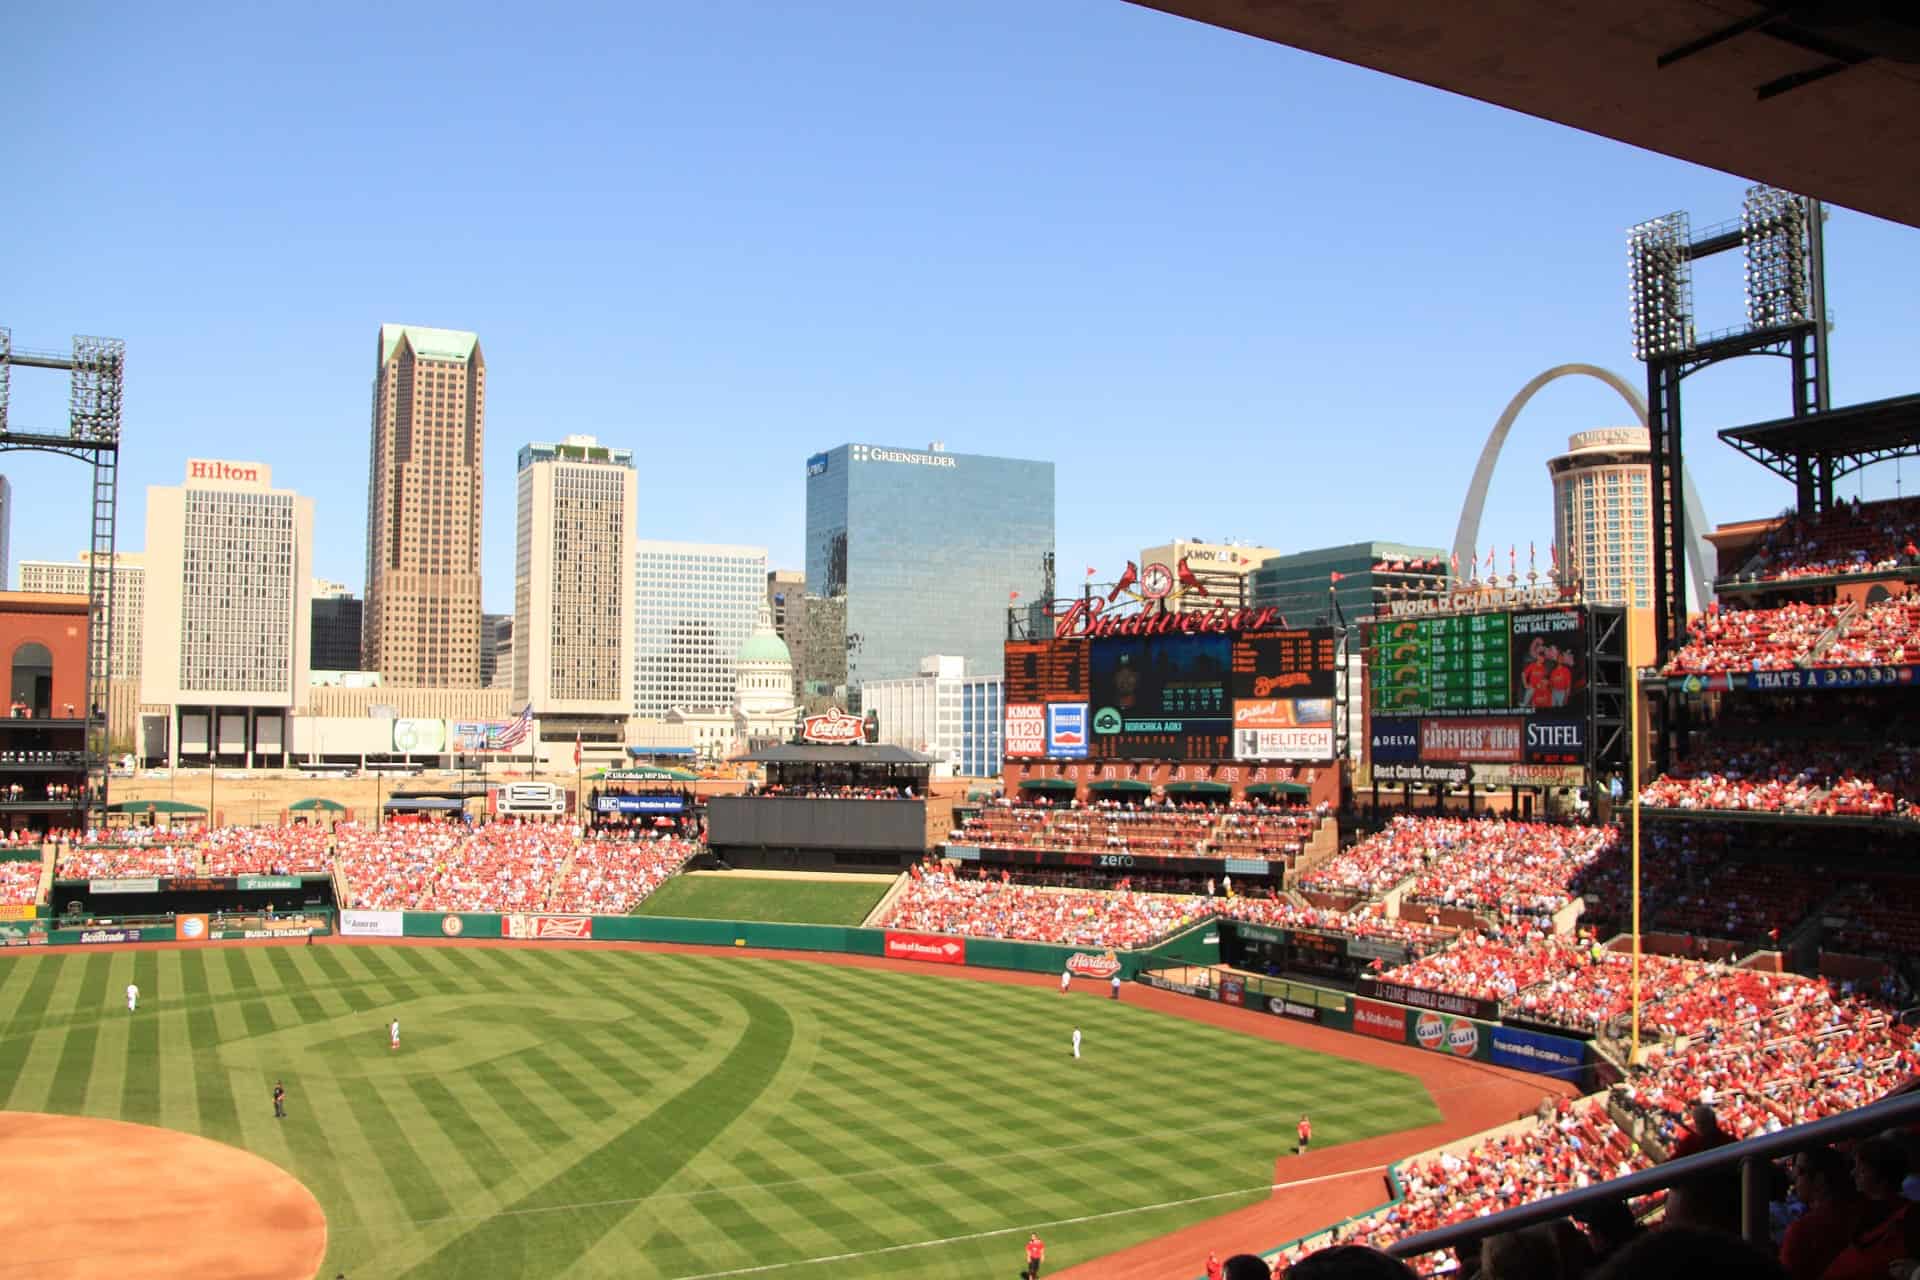 Best things to do in St Louis Missouri Dea Hoover Busch Stadium courtesy of ESD-SS on Pixabay